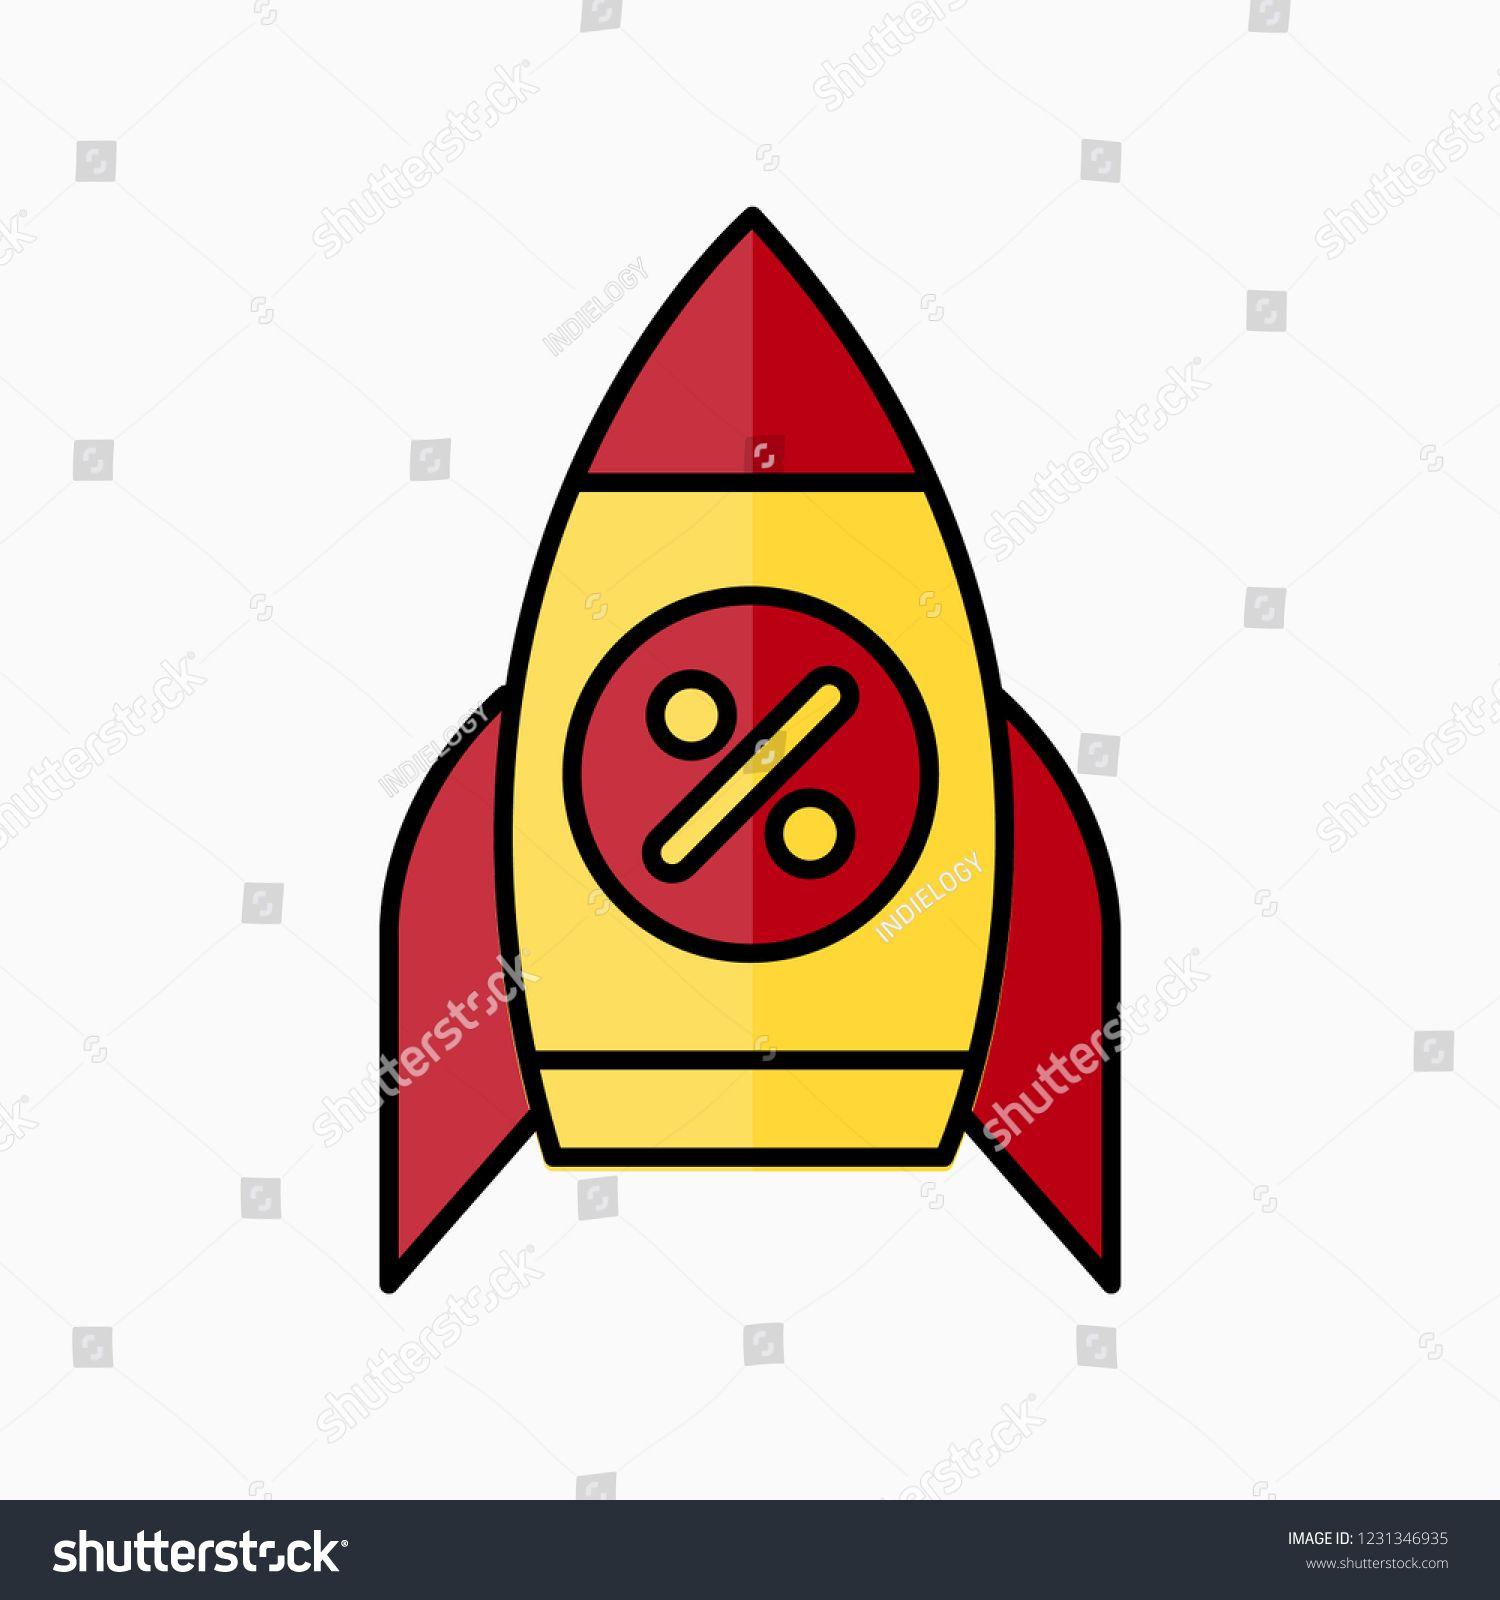 Yellow Filled with Red Line Logo - Launch Rocket symbol. Black Friday Sale & Cyber Monday vector Logo